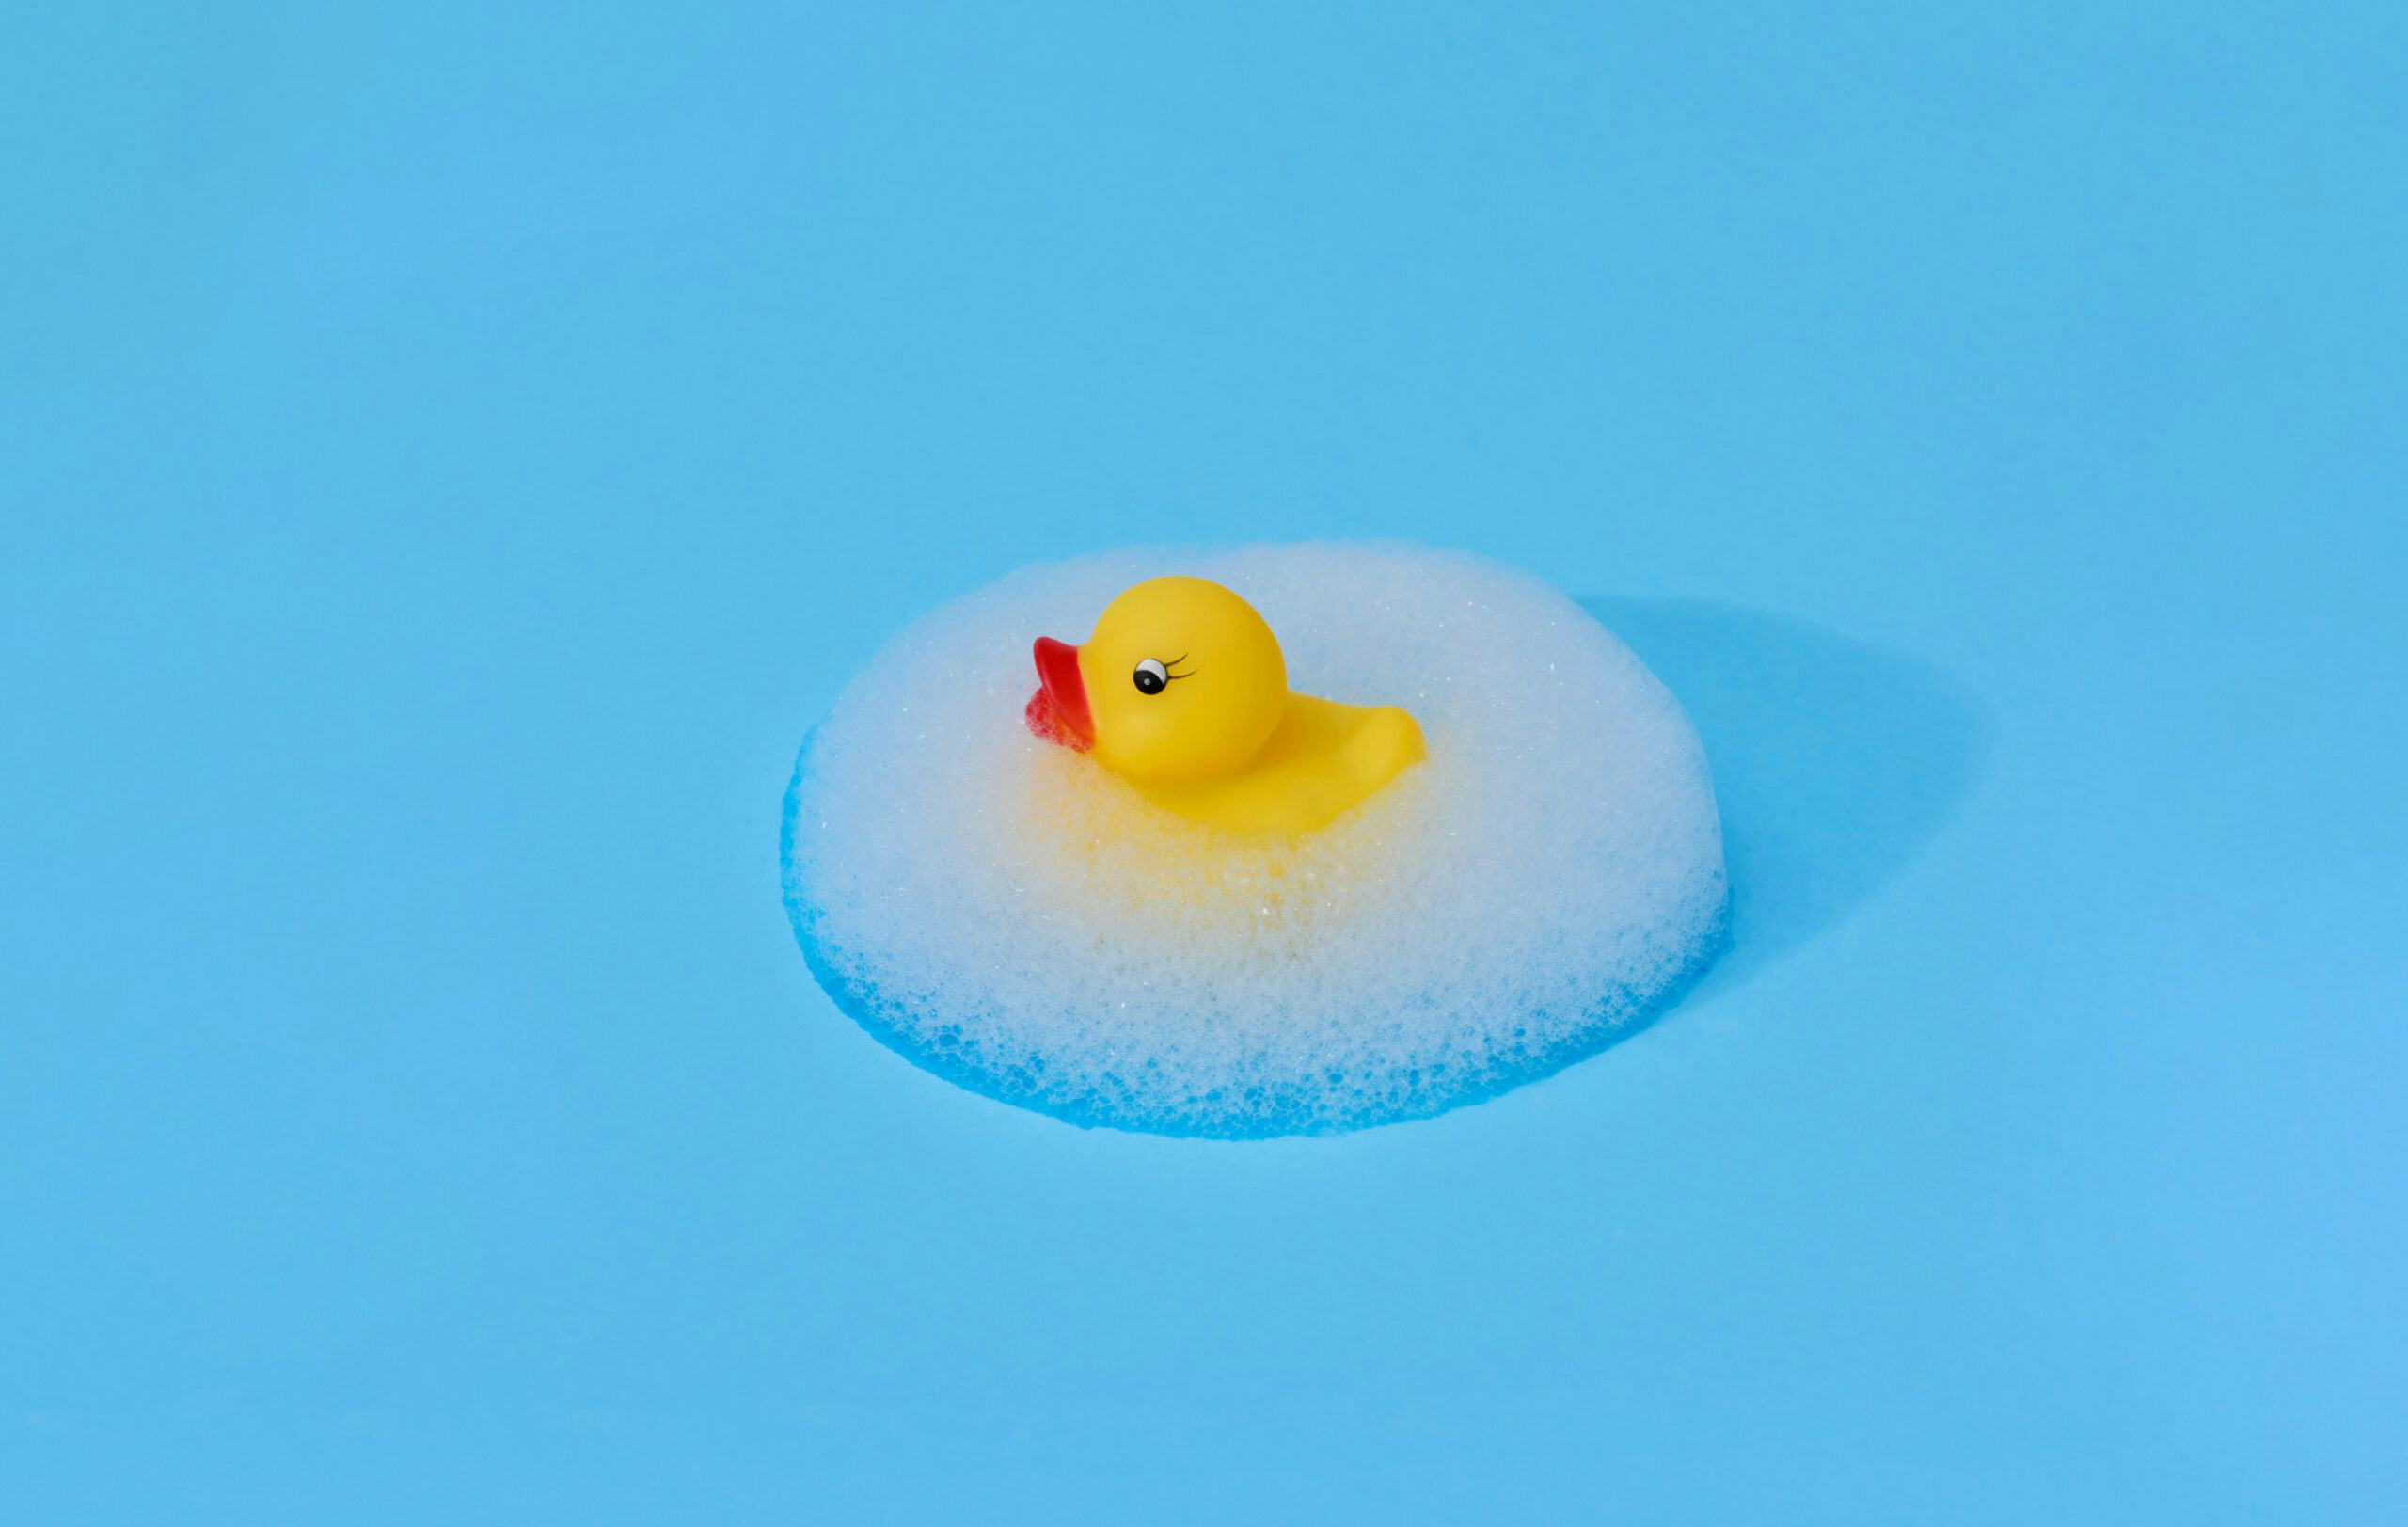 Yellow rubber duck surrounded by a symmetrical ellipsis of foam against a bright blue background.